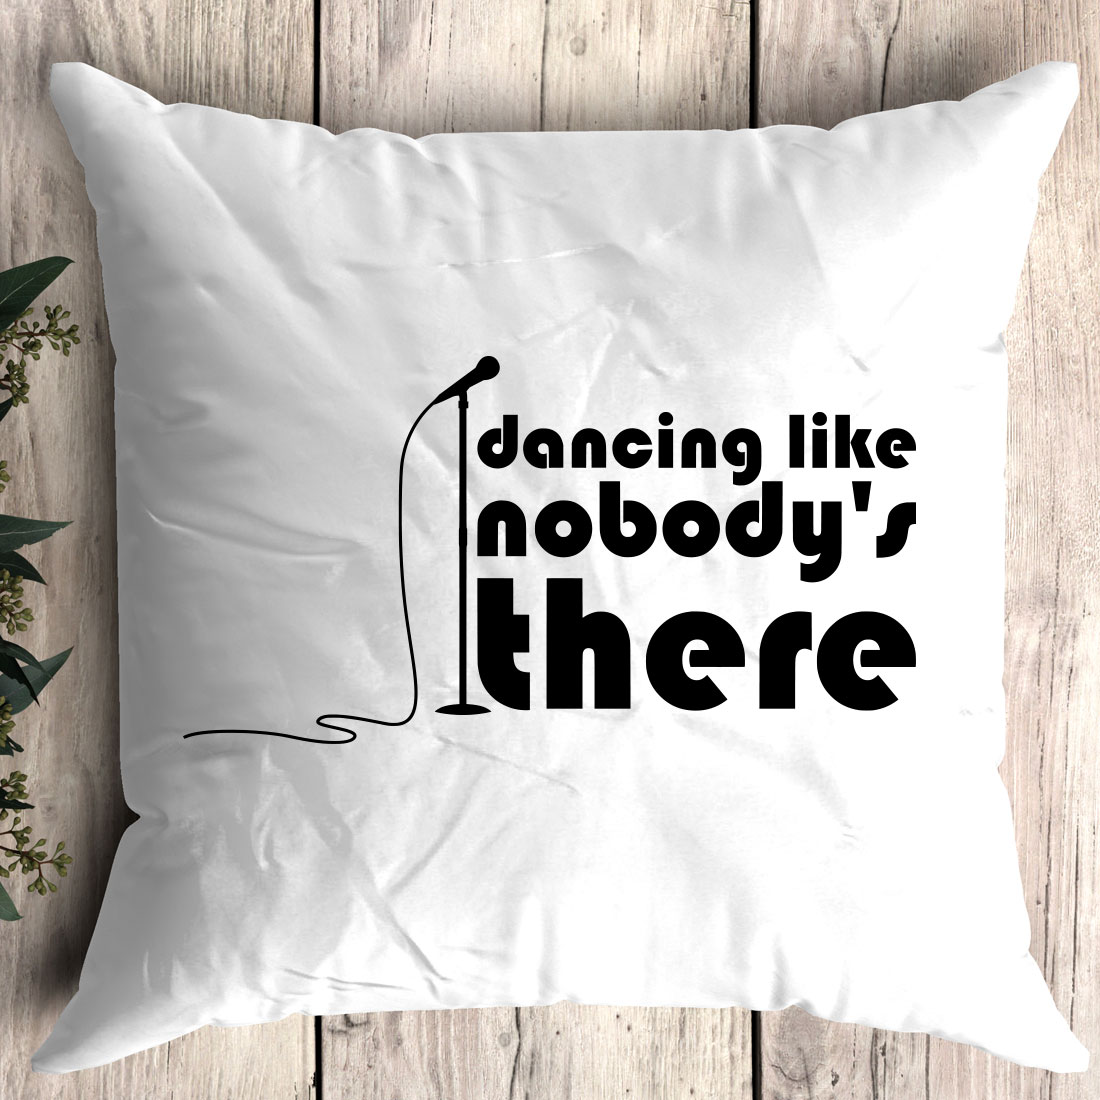 Pillow that says dancing like nobody's there.